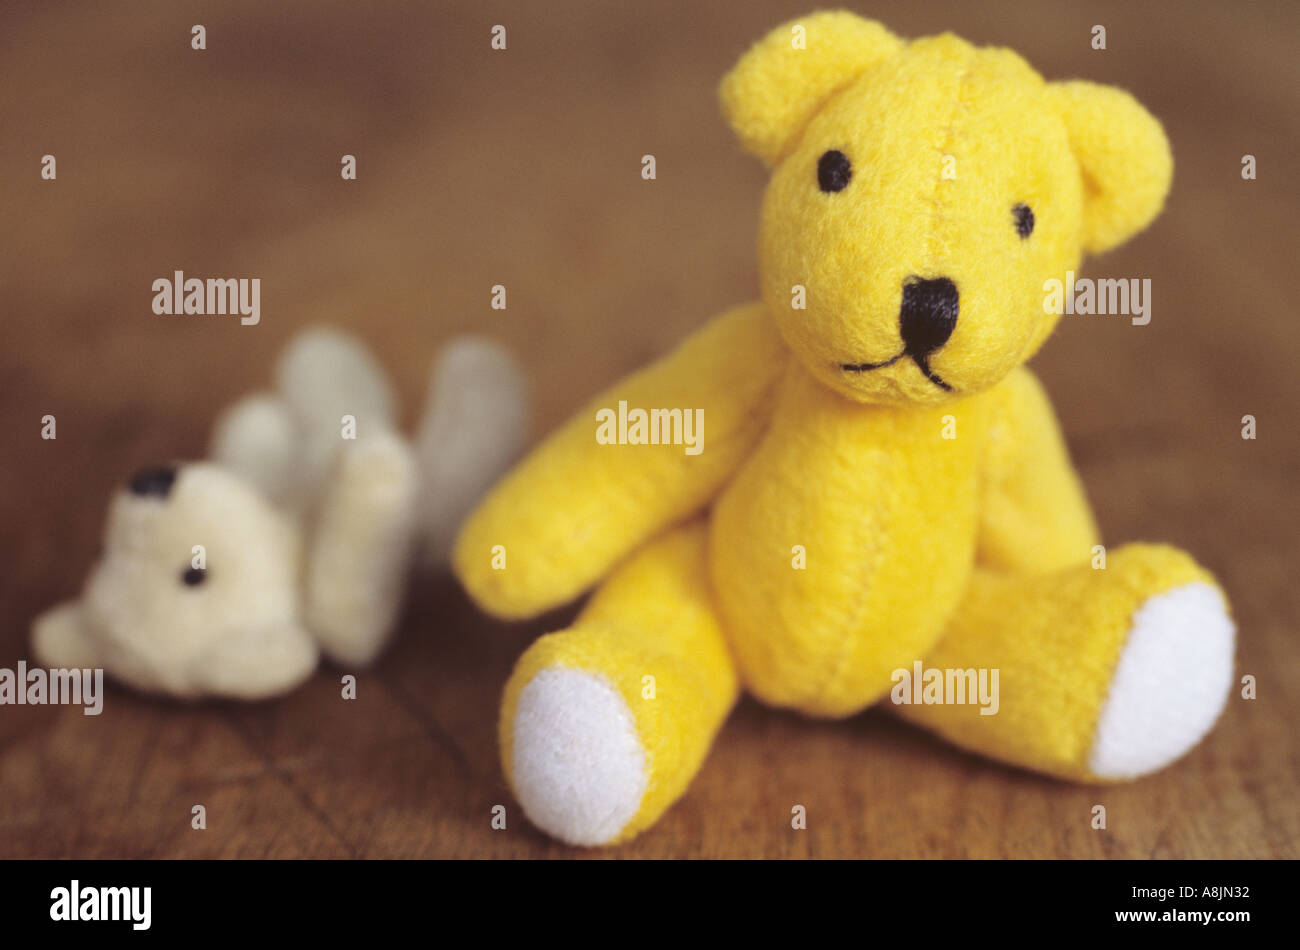 Small yellow teddy bear sitting on a wooden seat or table looking at viewer with a smaller paler ted lying alongside Stock Photo